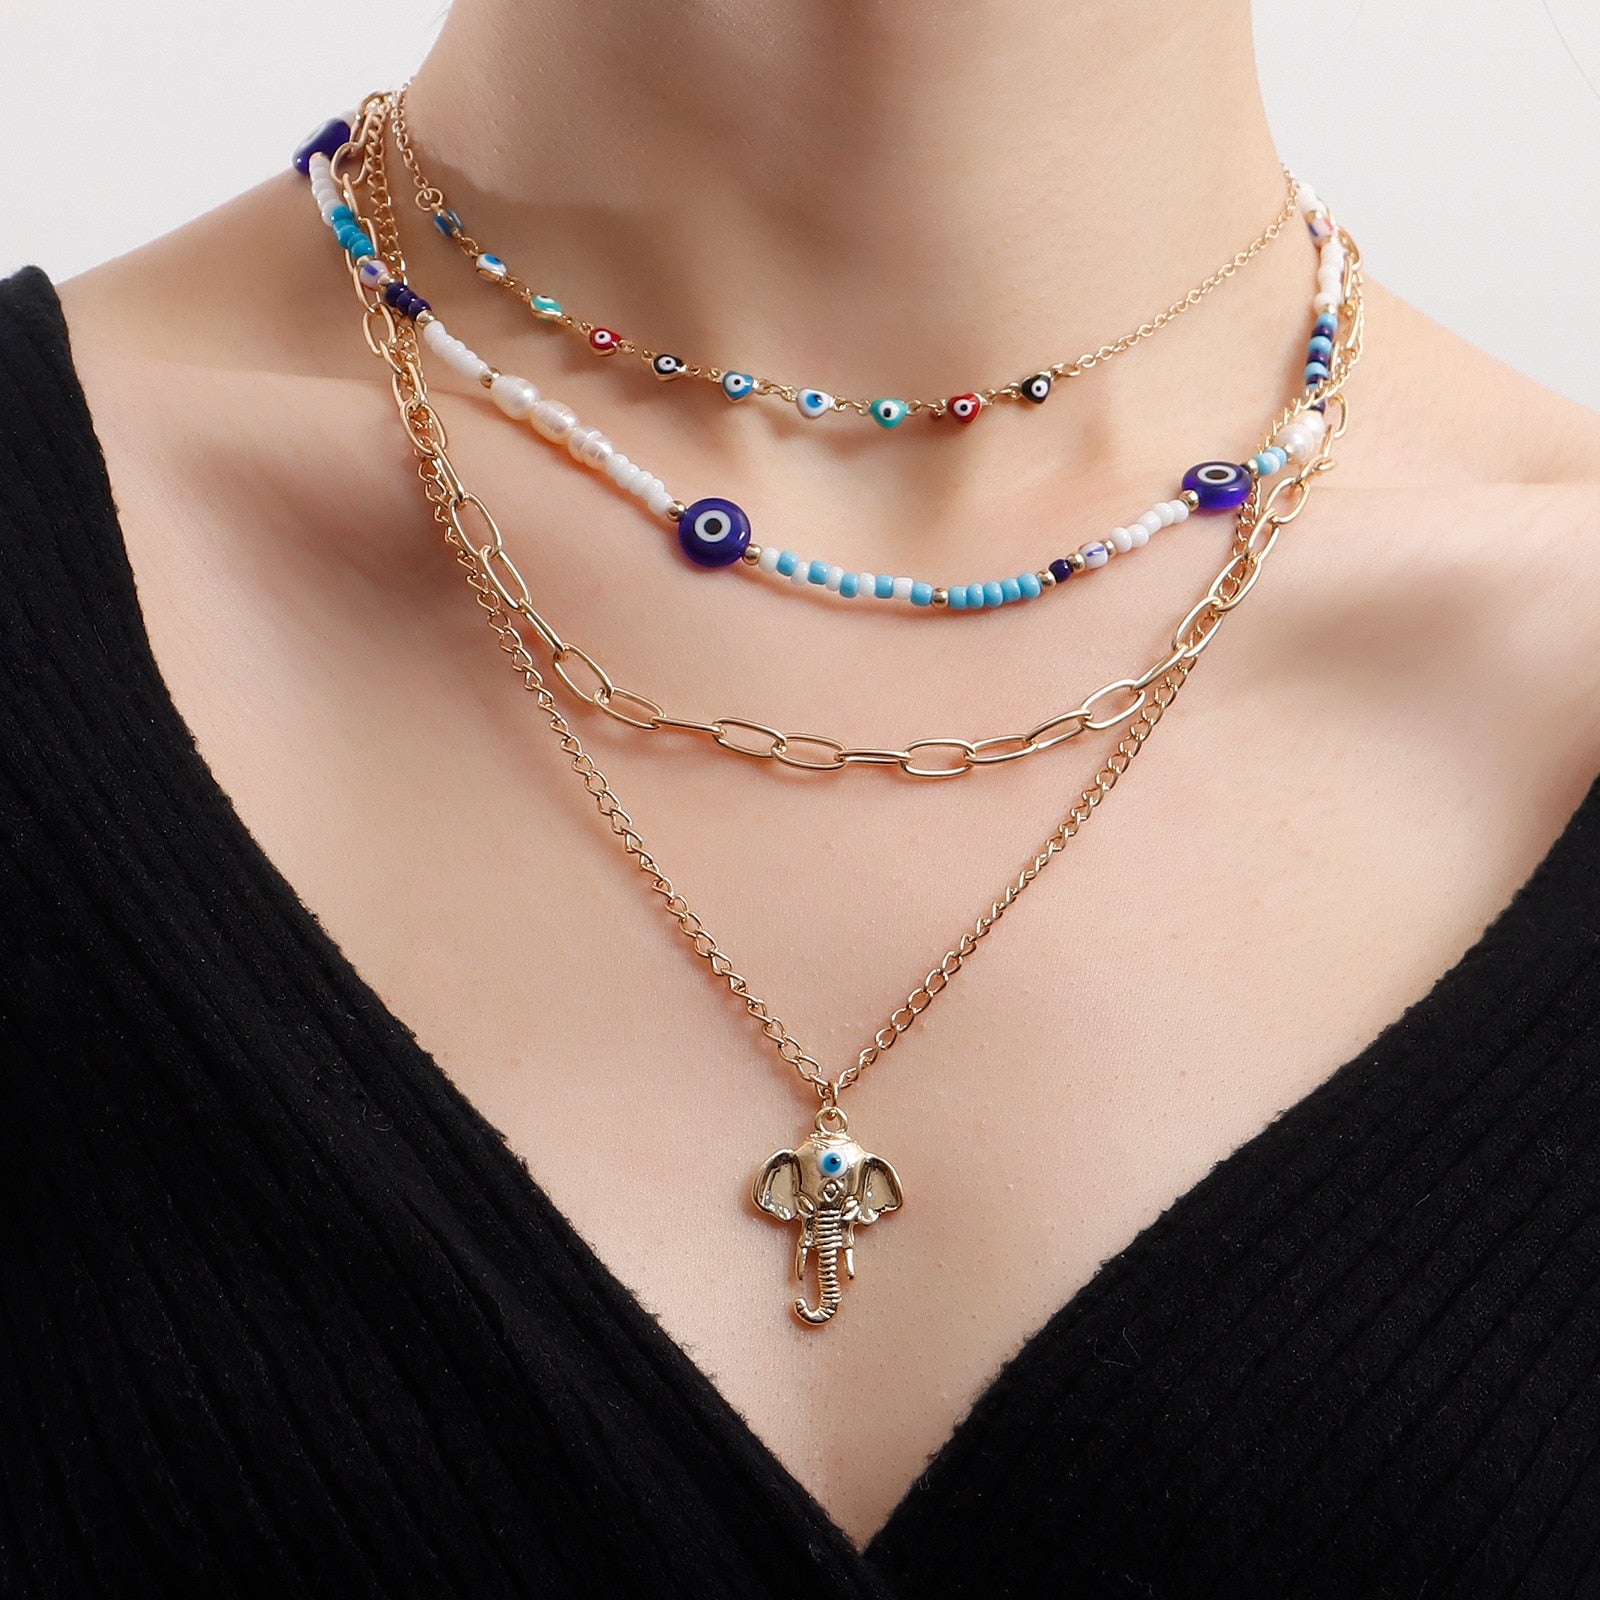 Boho Layered Necklace for Women and girls This chain necklace gives the  look of stylish and bold. These statement chain necklaces look… | Instagram